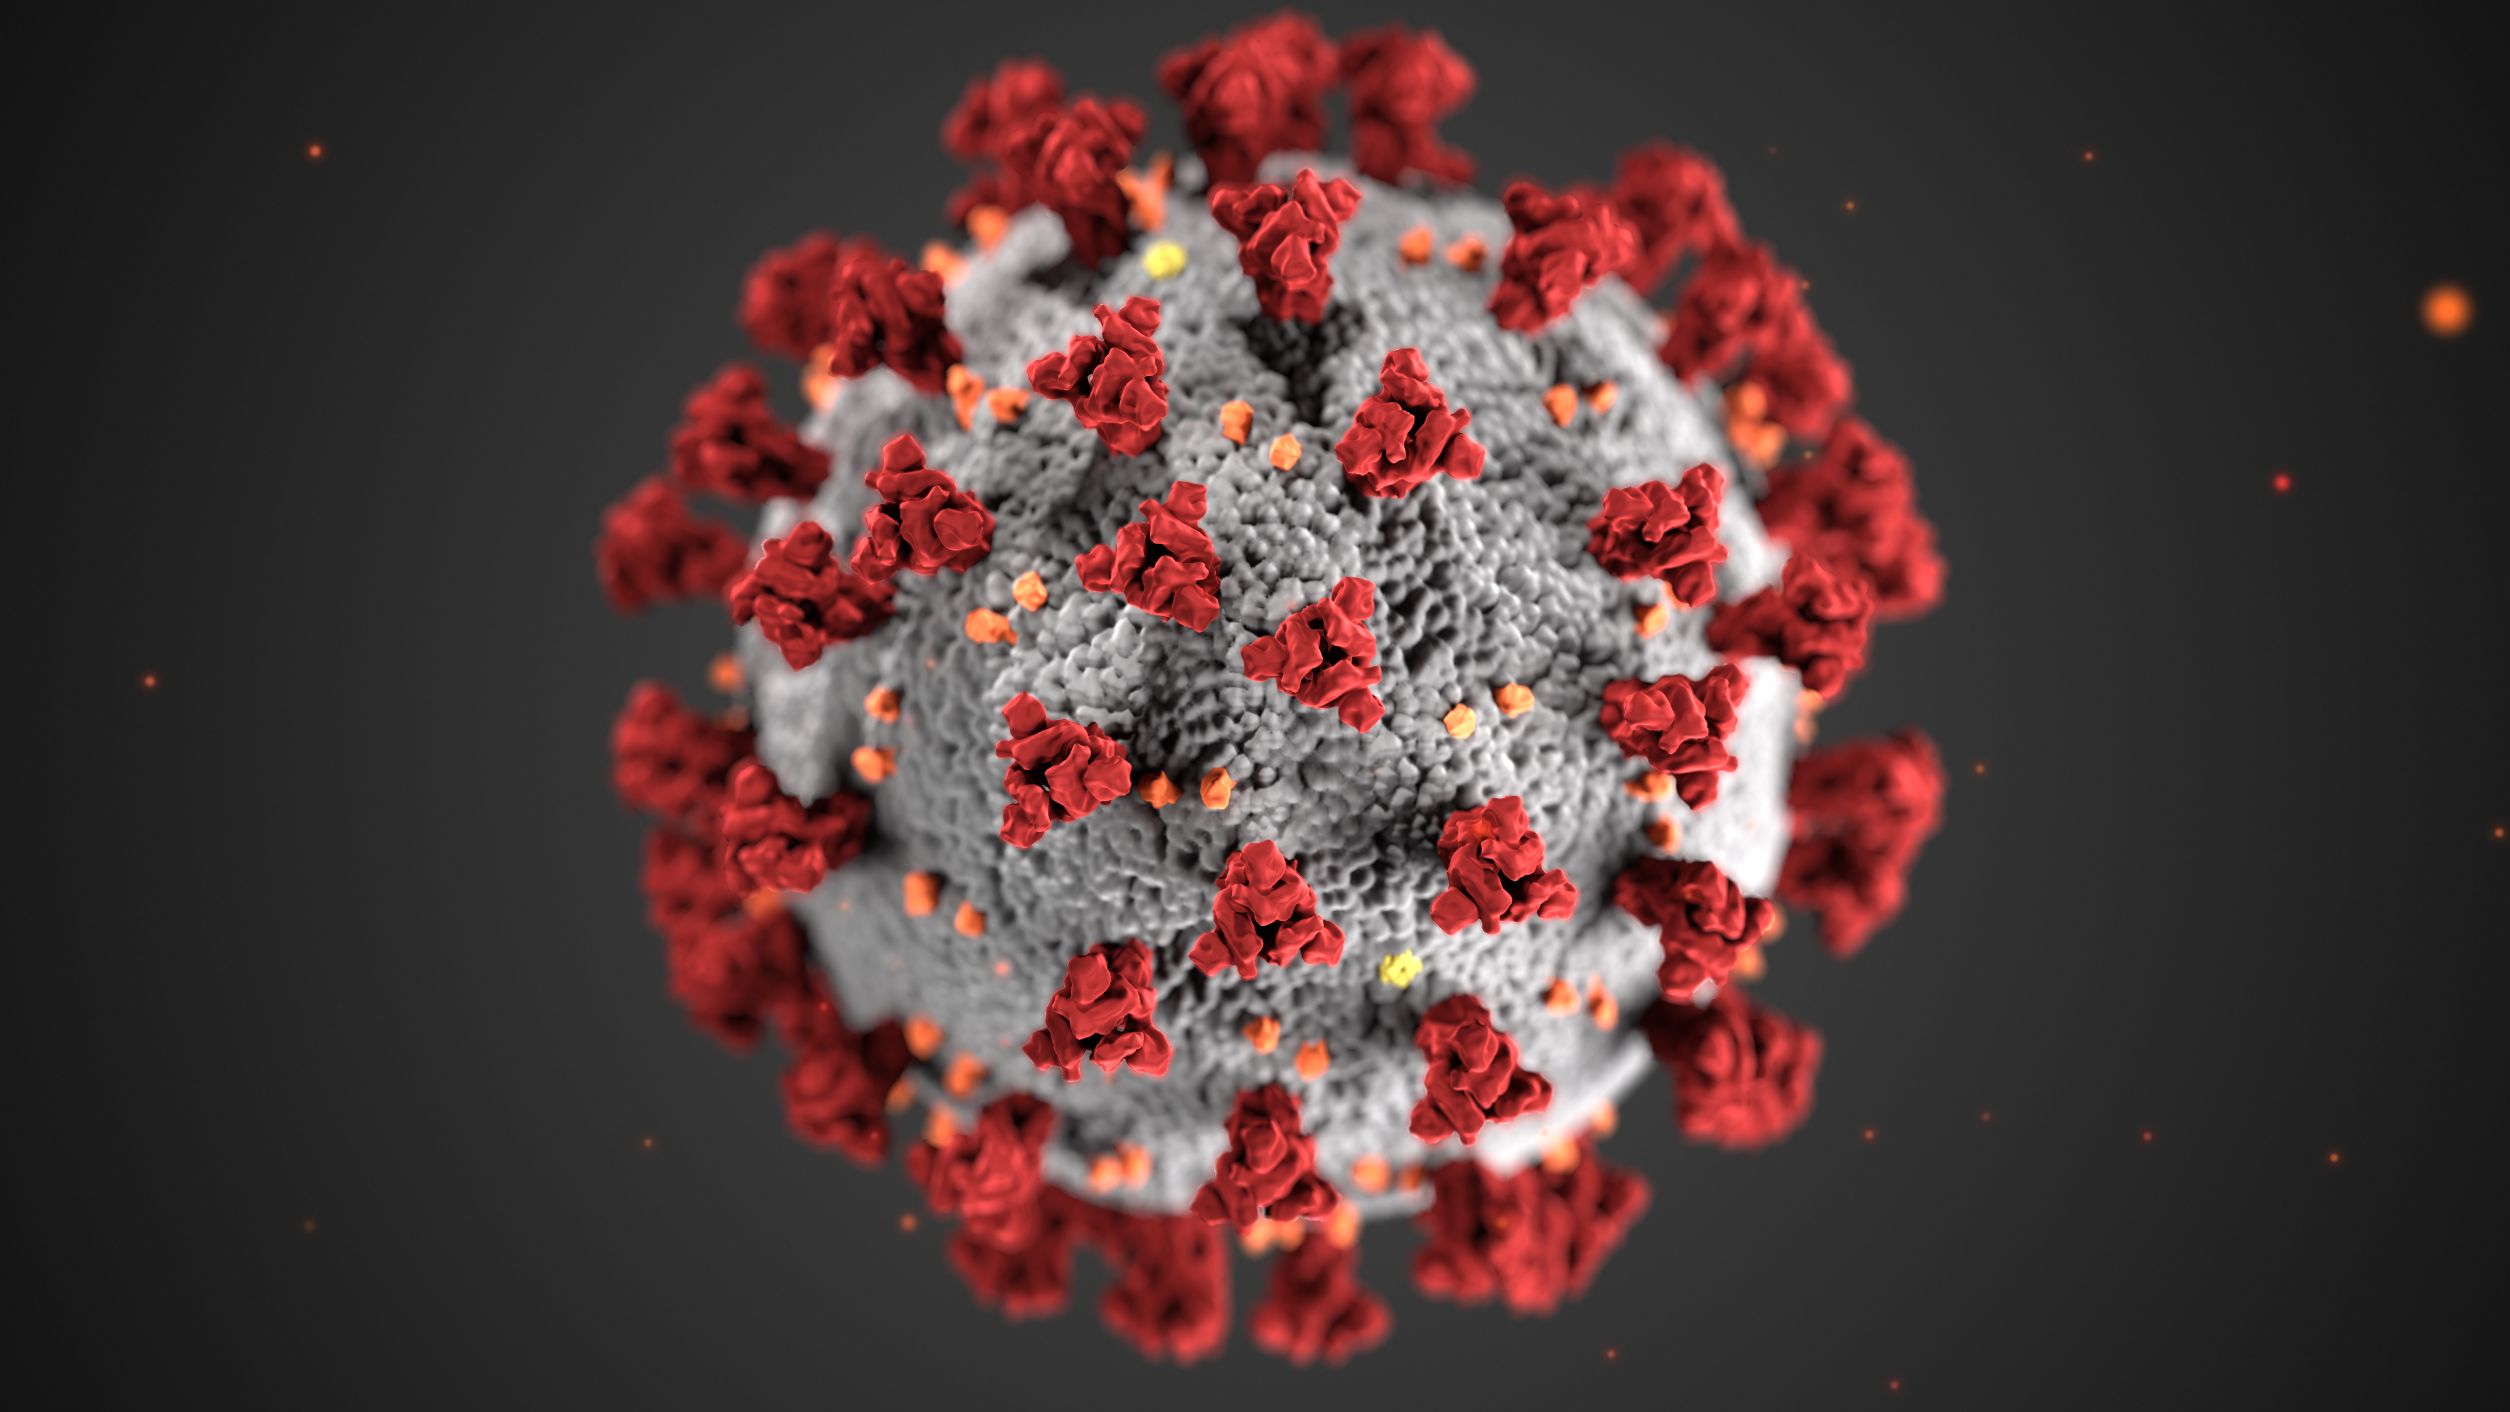 Illustration of SARS-CoV-2, the virus that causes the respiratory illness known as COVID-19. Photo: Centers for Disease Control and Prevention (CDC) 